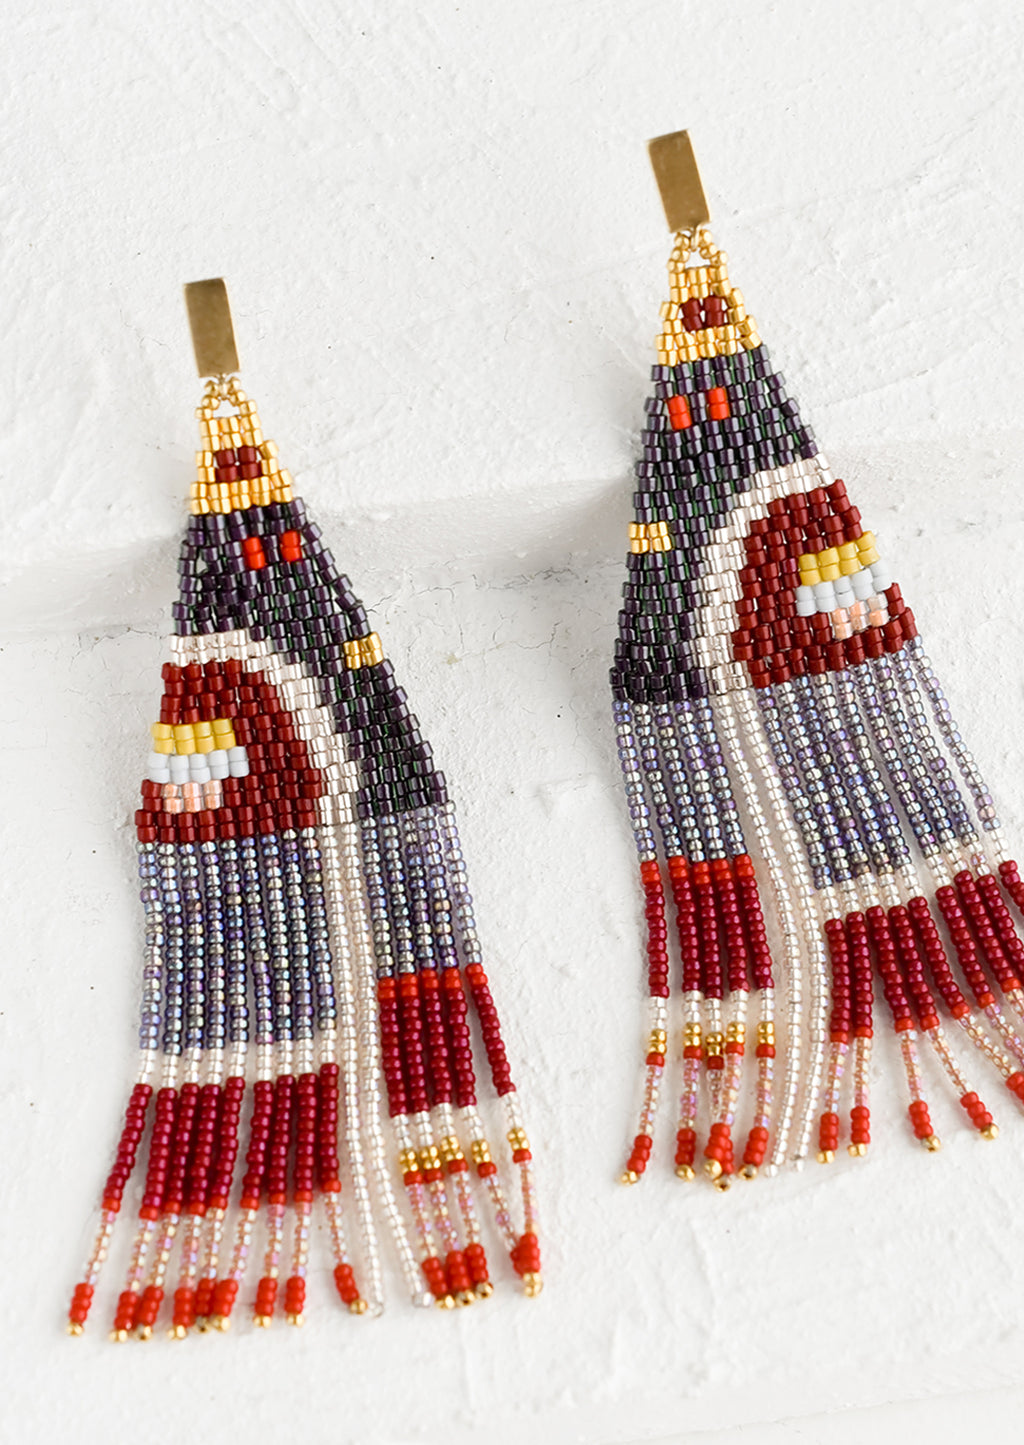 Ruby Multi: A pair of beaded earrings in red and blue geometric design with brass posts.